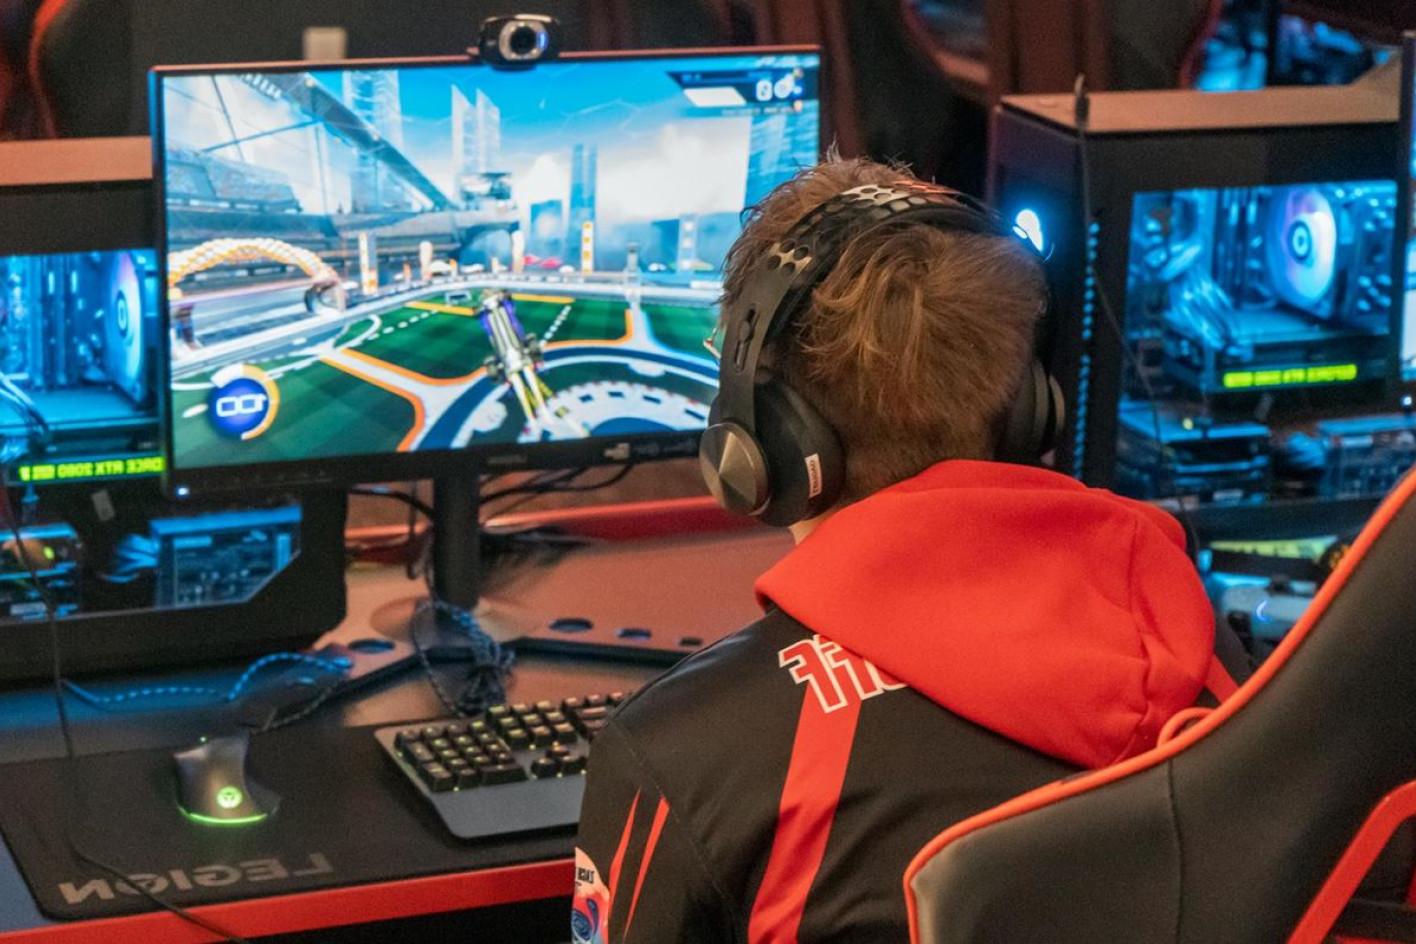 In their inaugural season, Carthage esports won the NECC Conference Title in Rocket League.